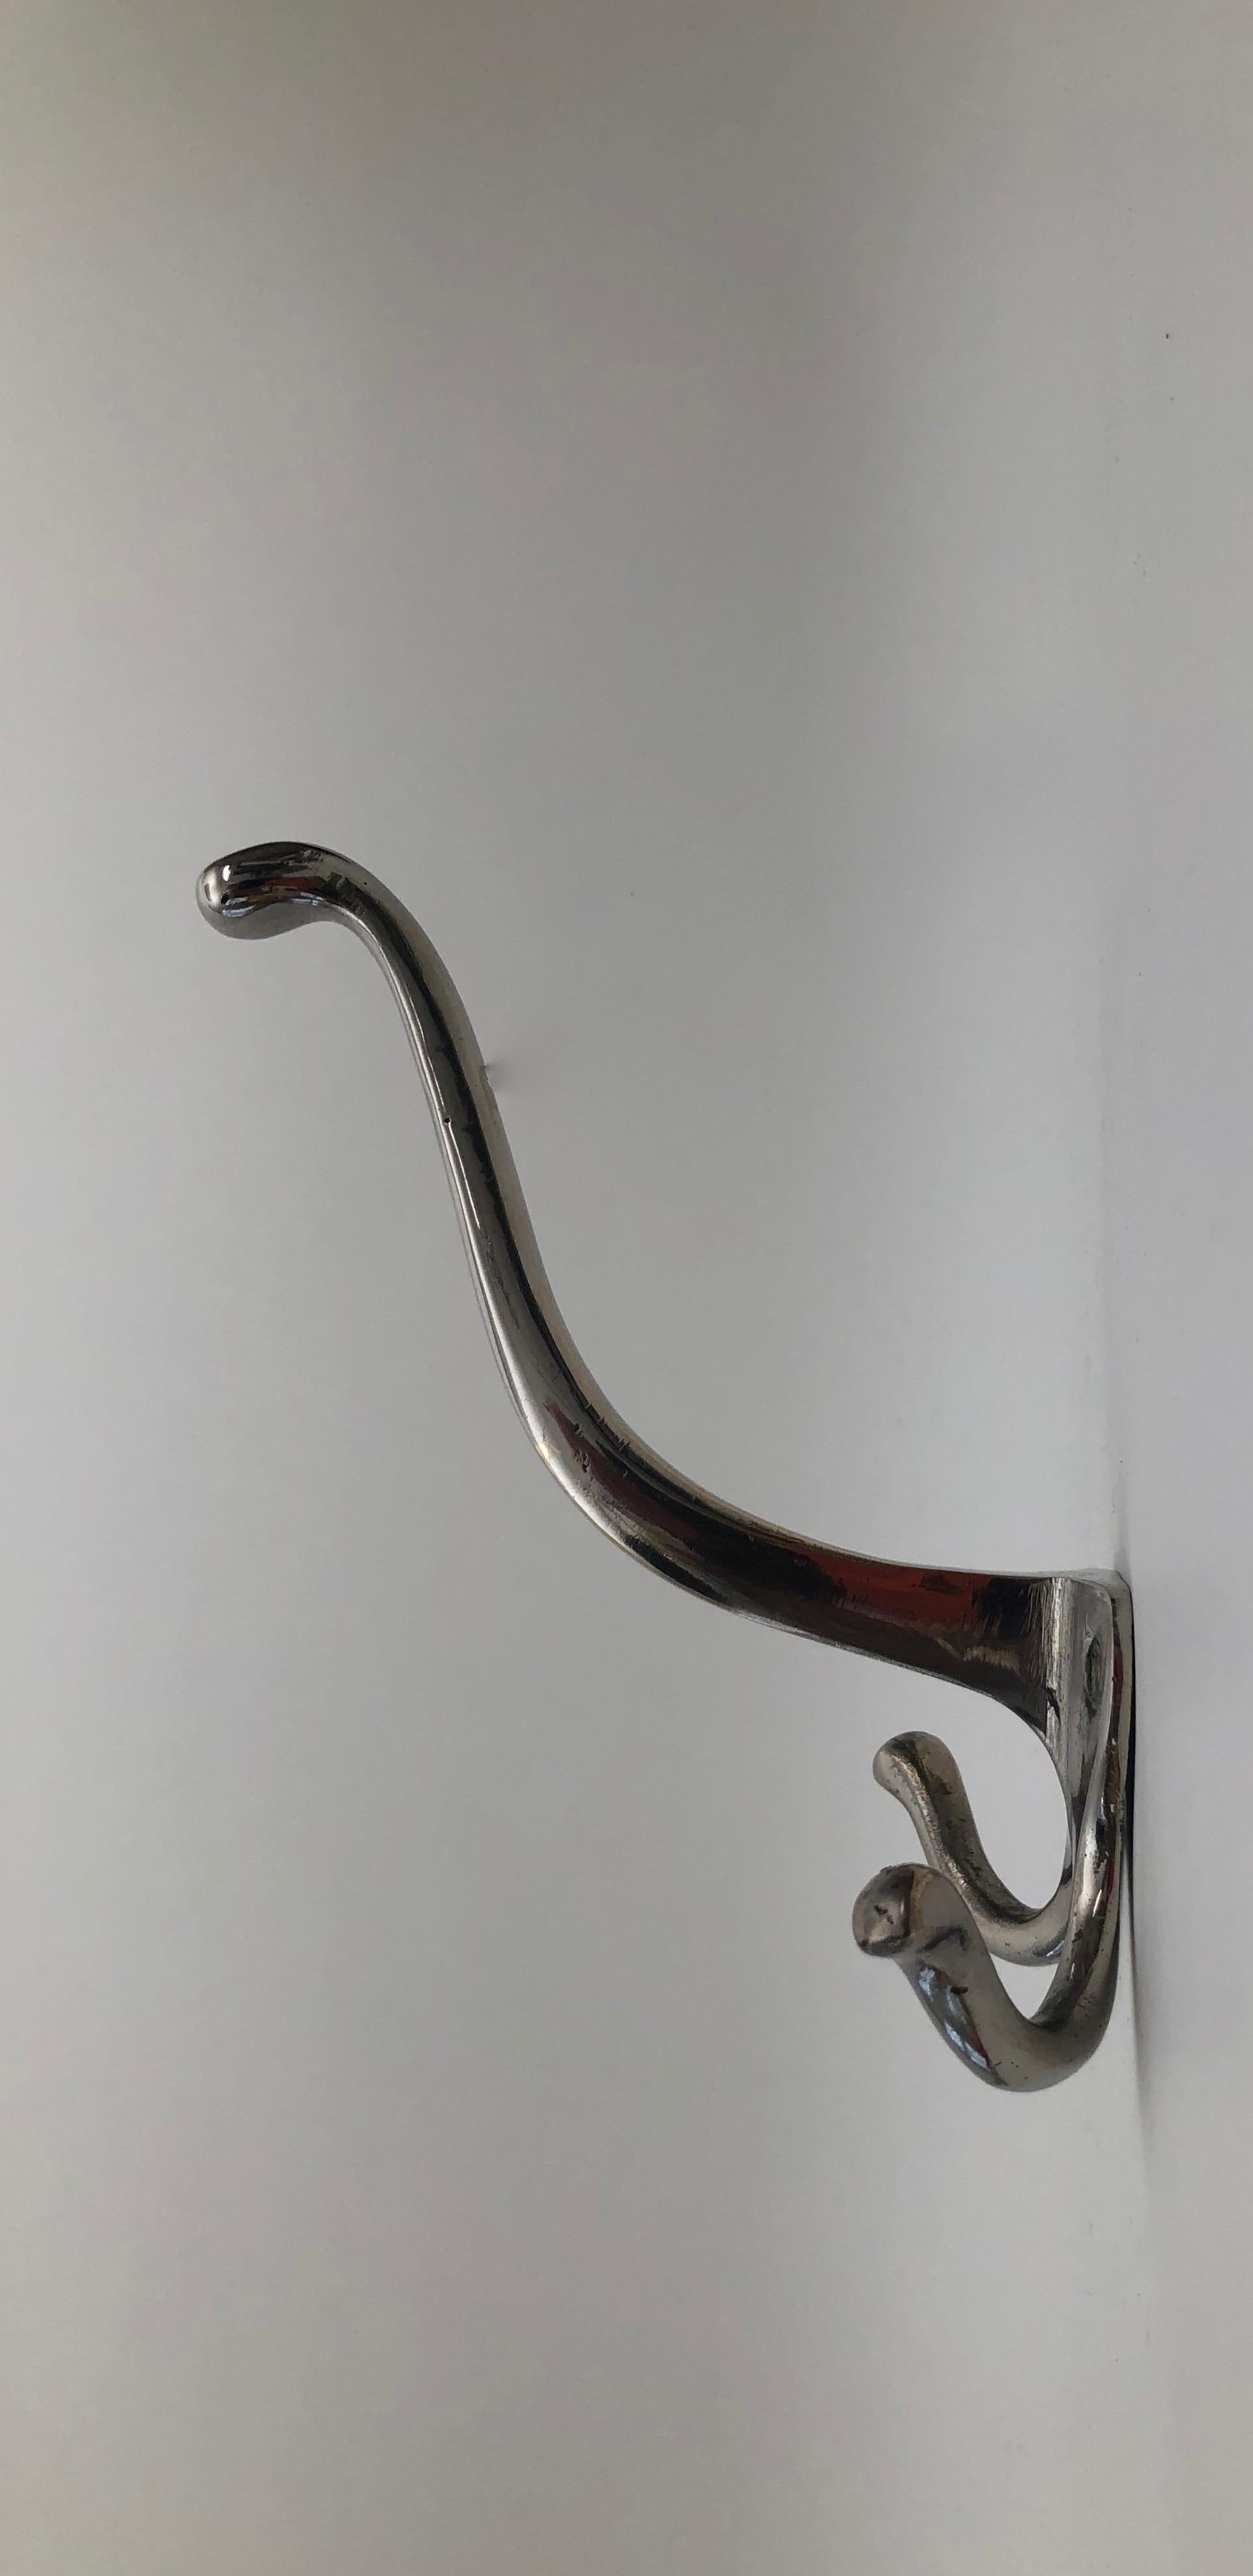 Plated Six Jugendstil Coat Hooks for the Wall, Made in Austria, circa 1900